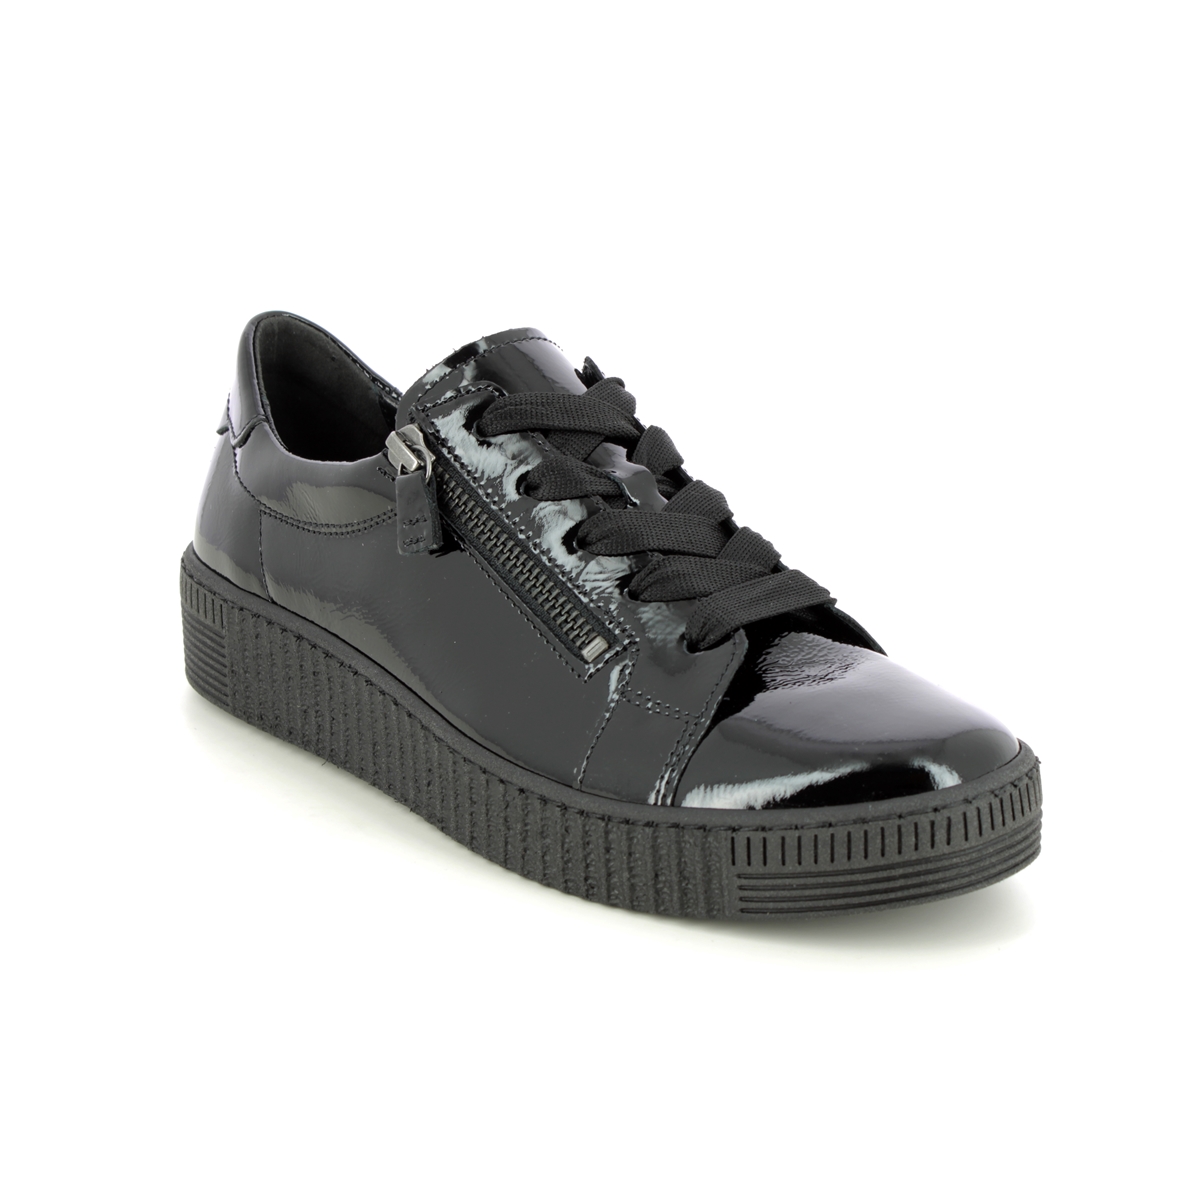 Gabor Wisdom Black Patent Womens Trainers 93.334.97 In Size 6 In Plain Black Patent  Womens Trainers In Soft Black Patent Leather